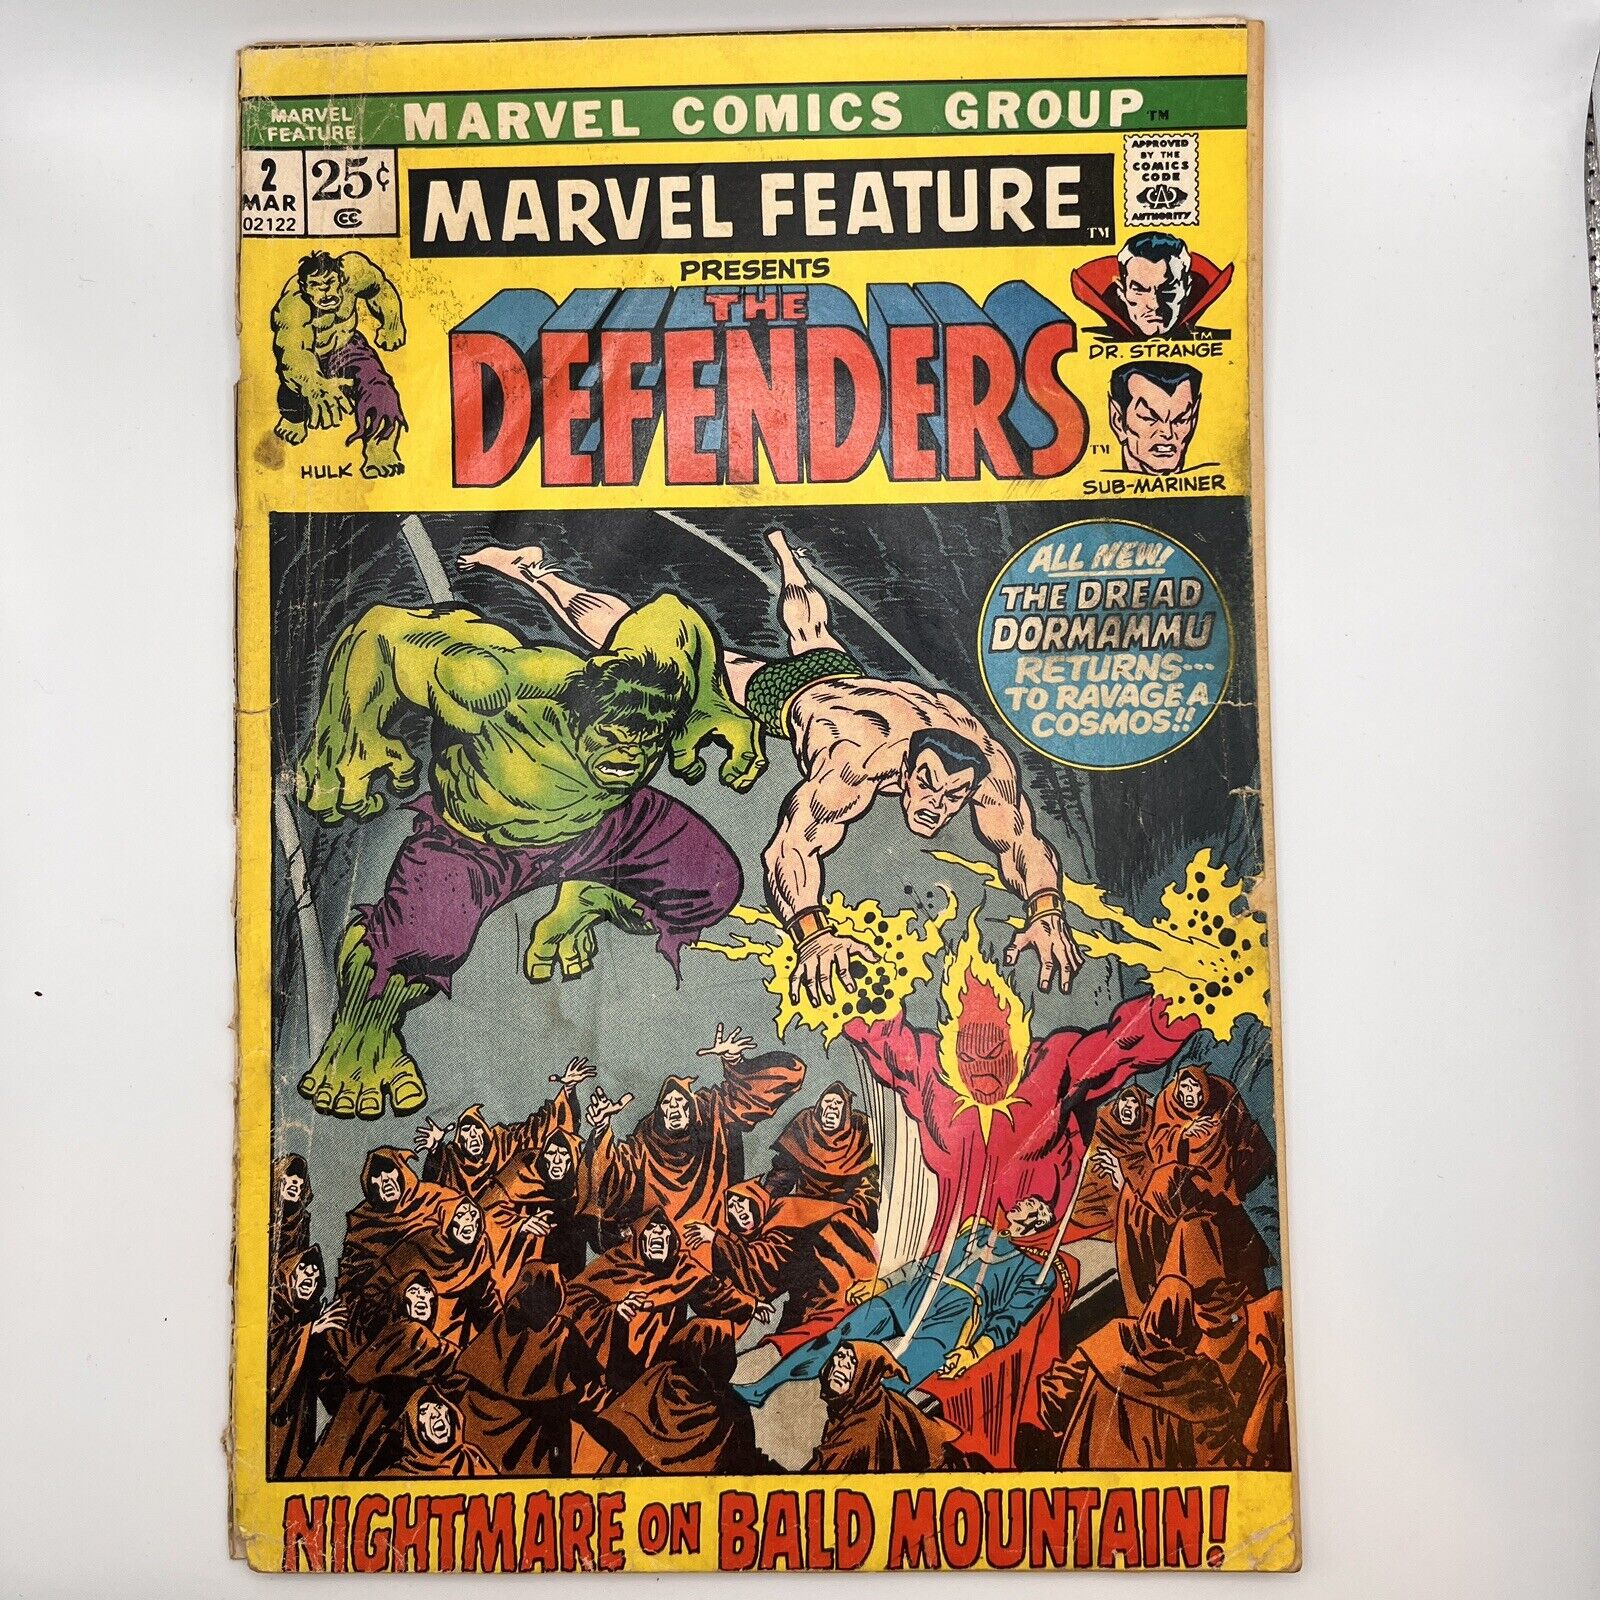 Marvel Feature Presents the Defenders #2 2nd Appearance, 1050s Sub-Mariner Story